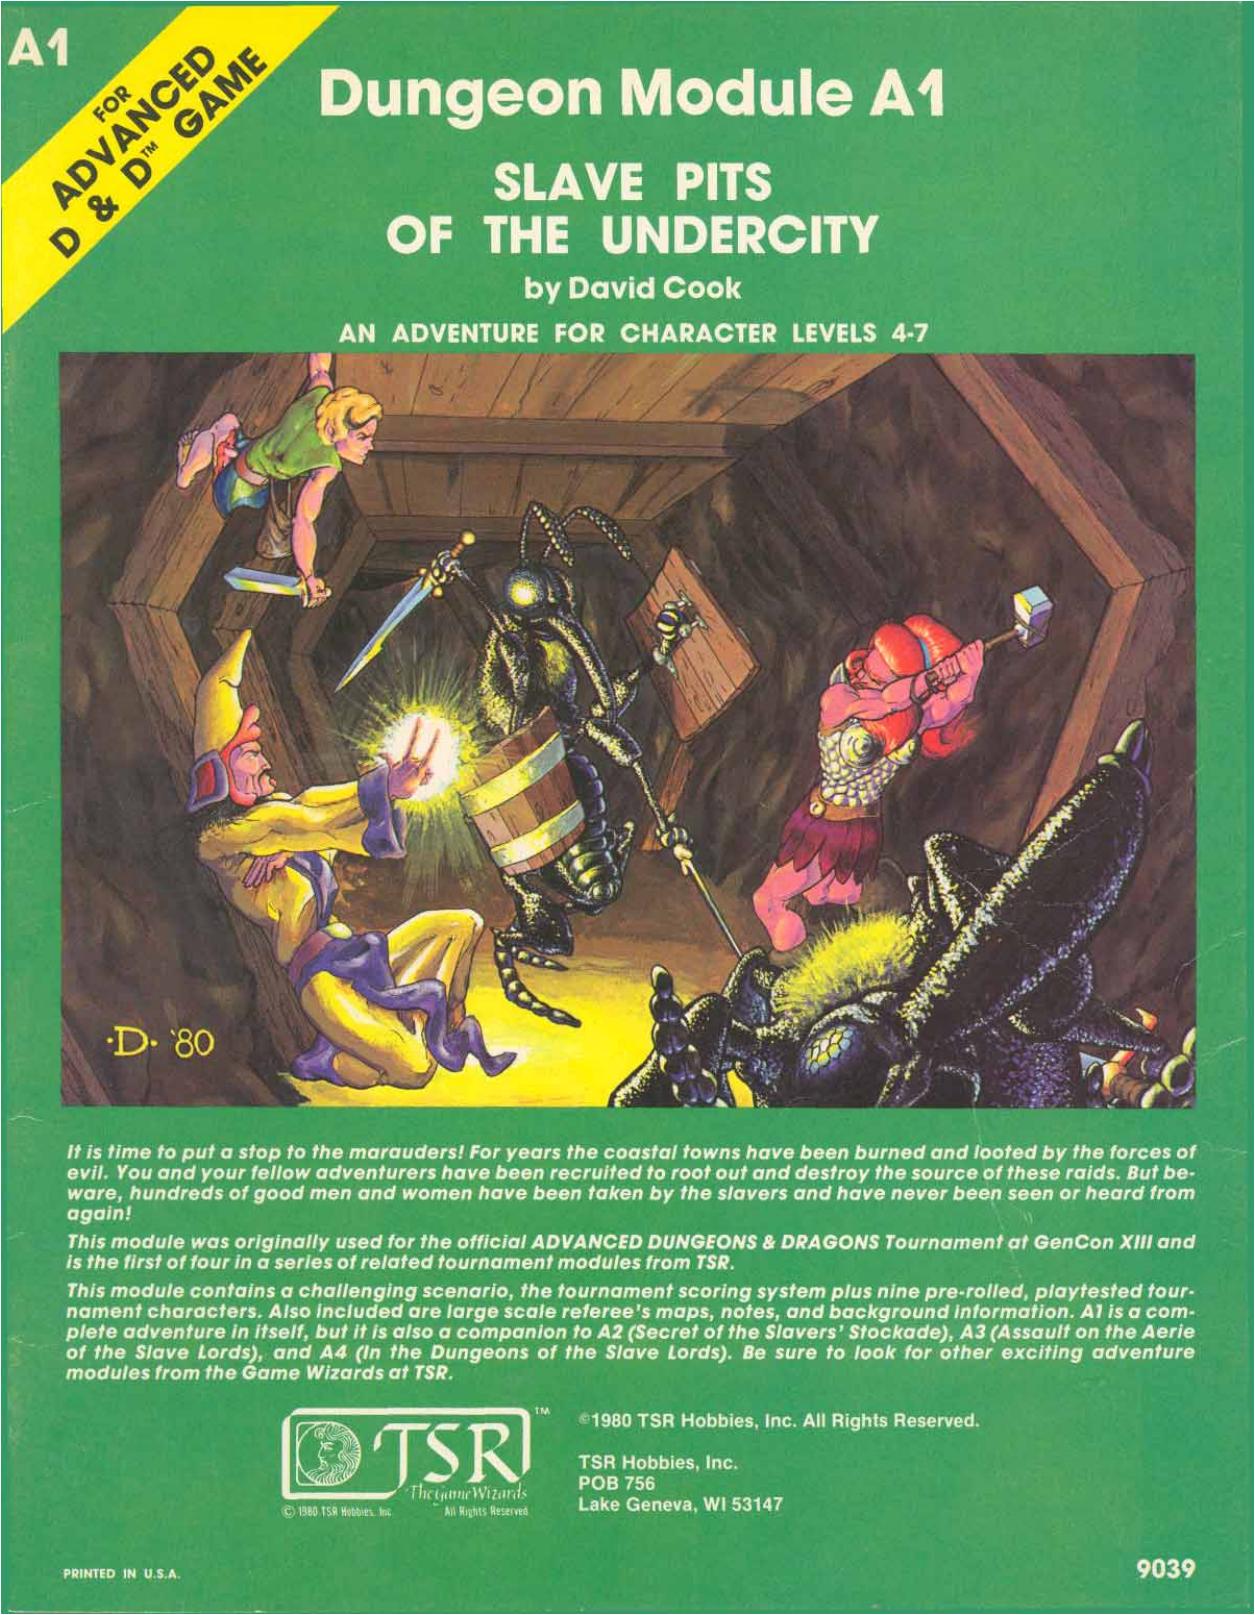 Slave Pits of the Undercity